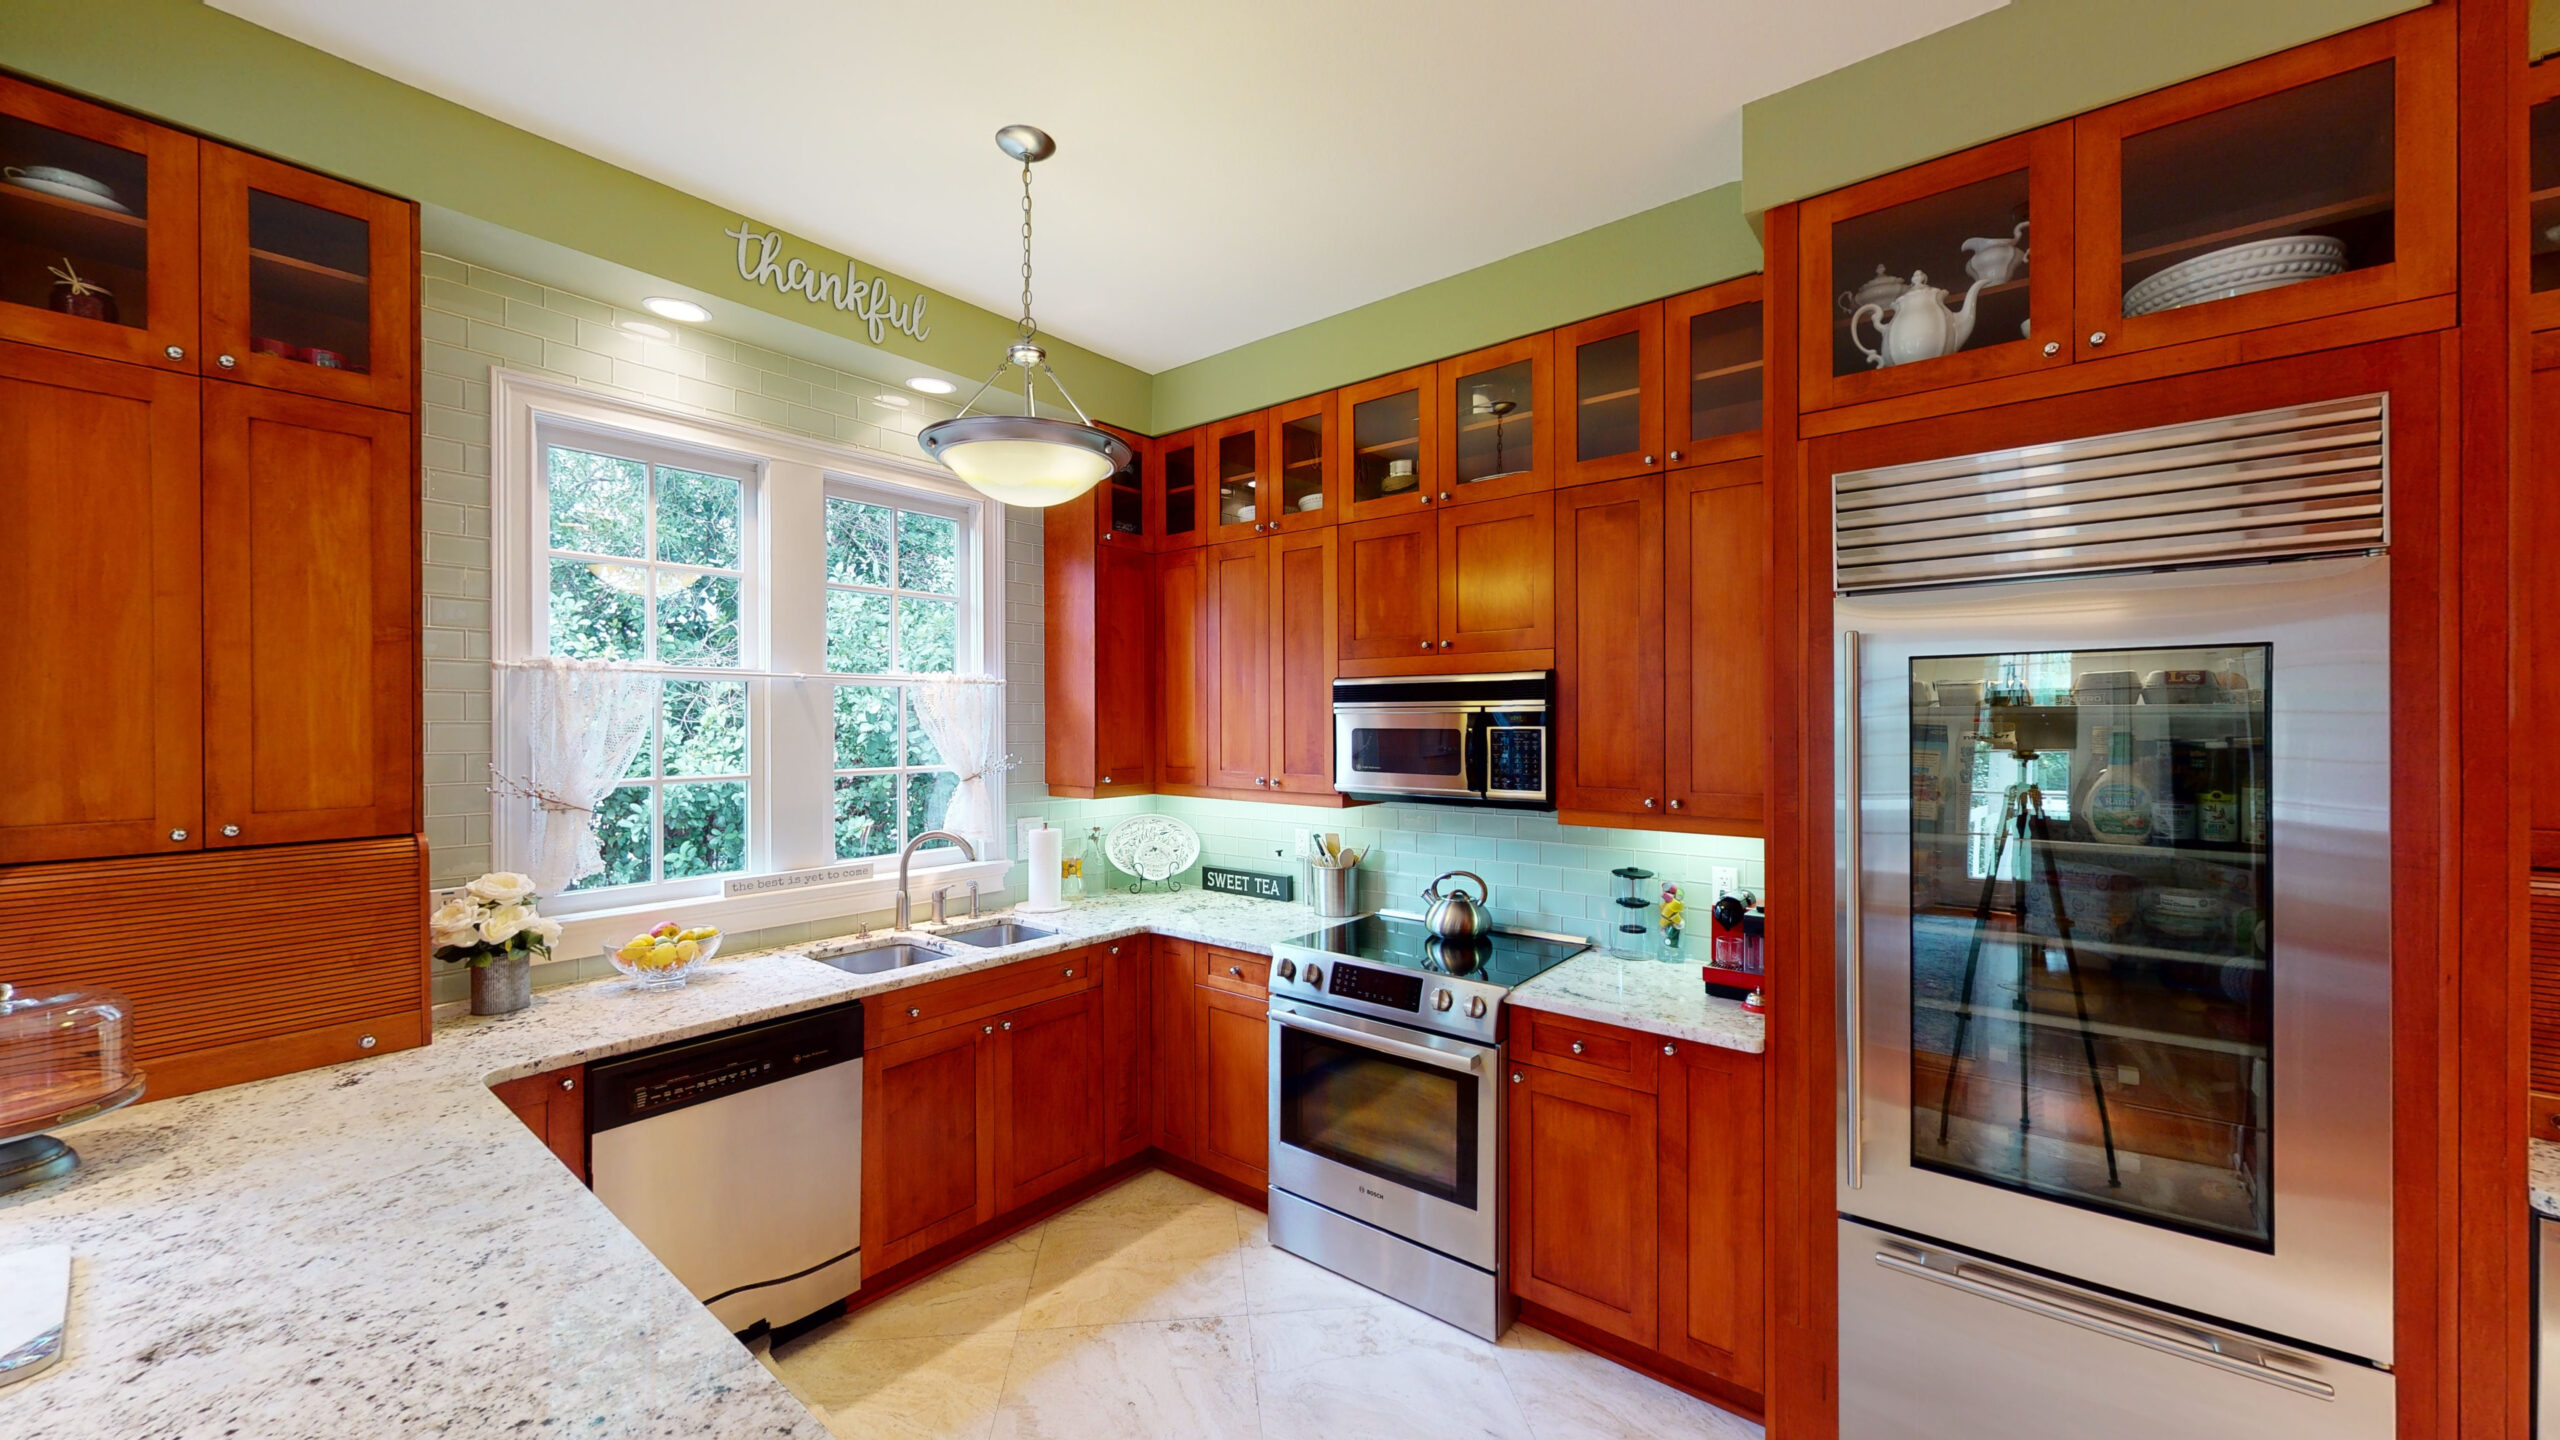 A kitchen with wooden cabinets and marble counters